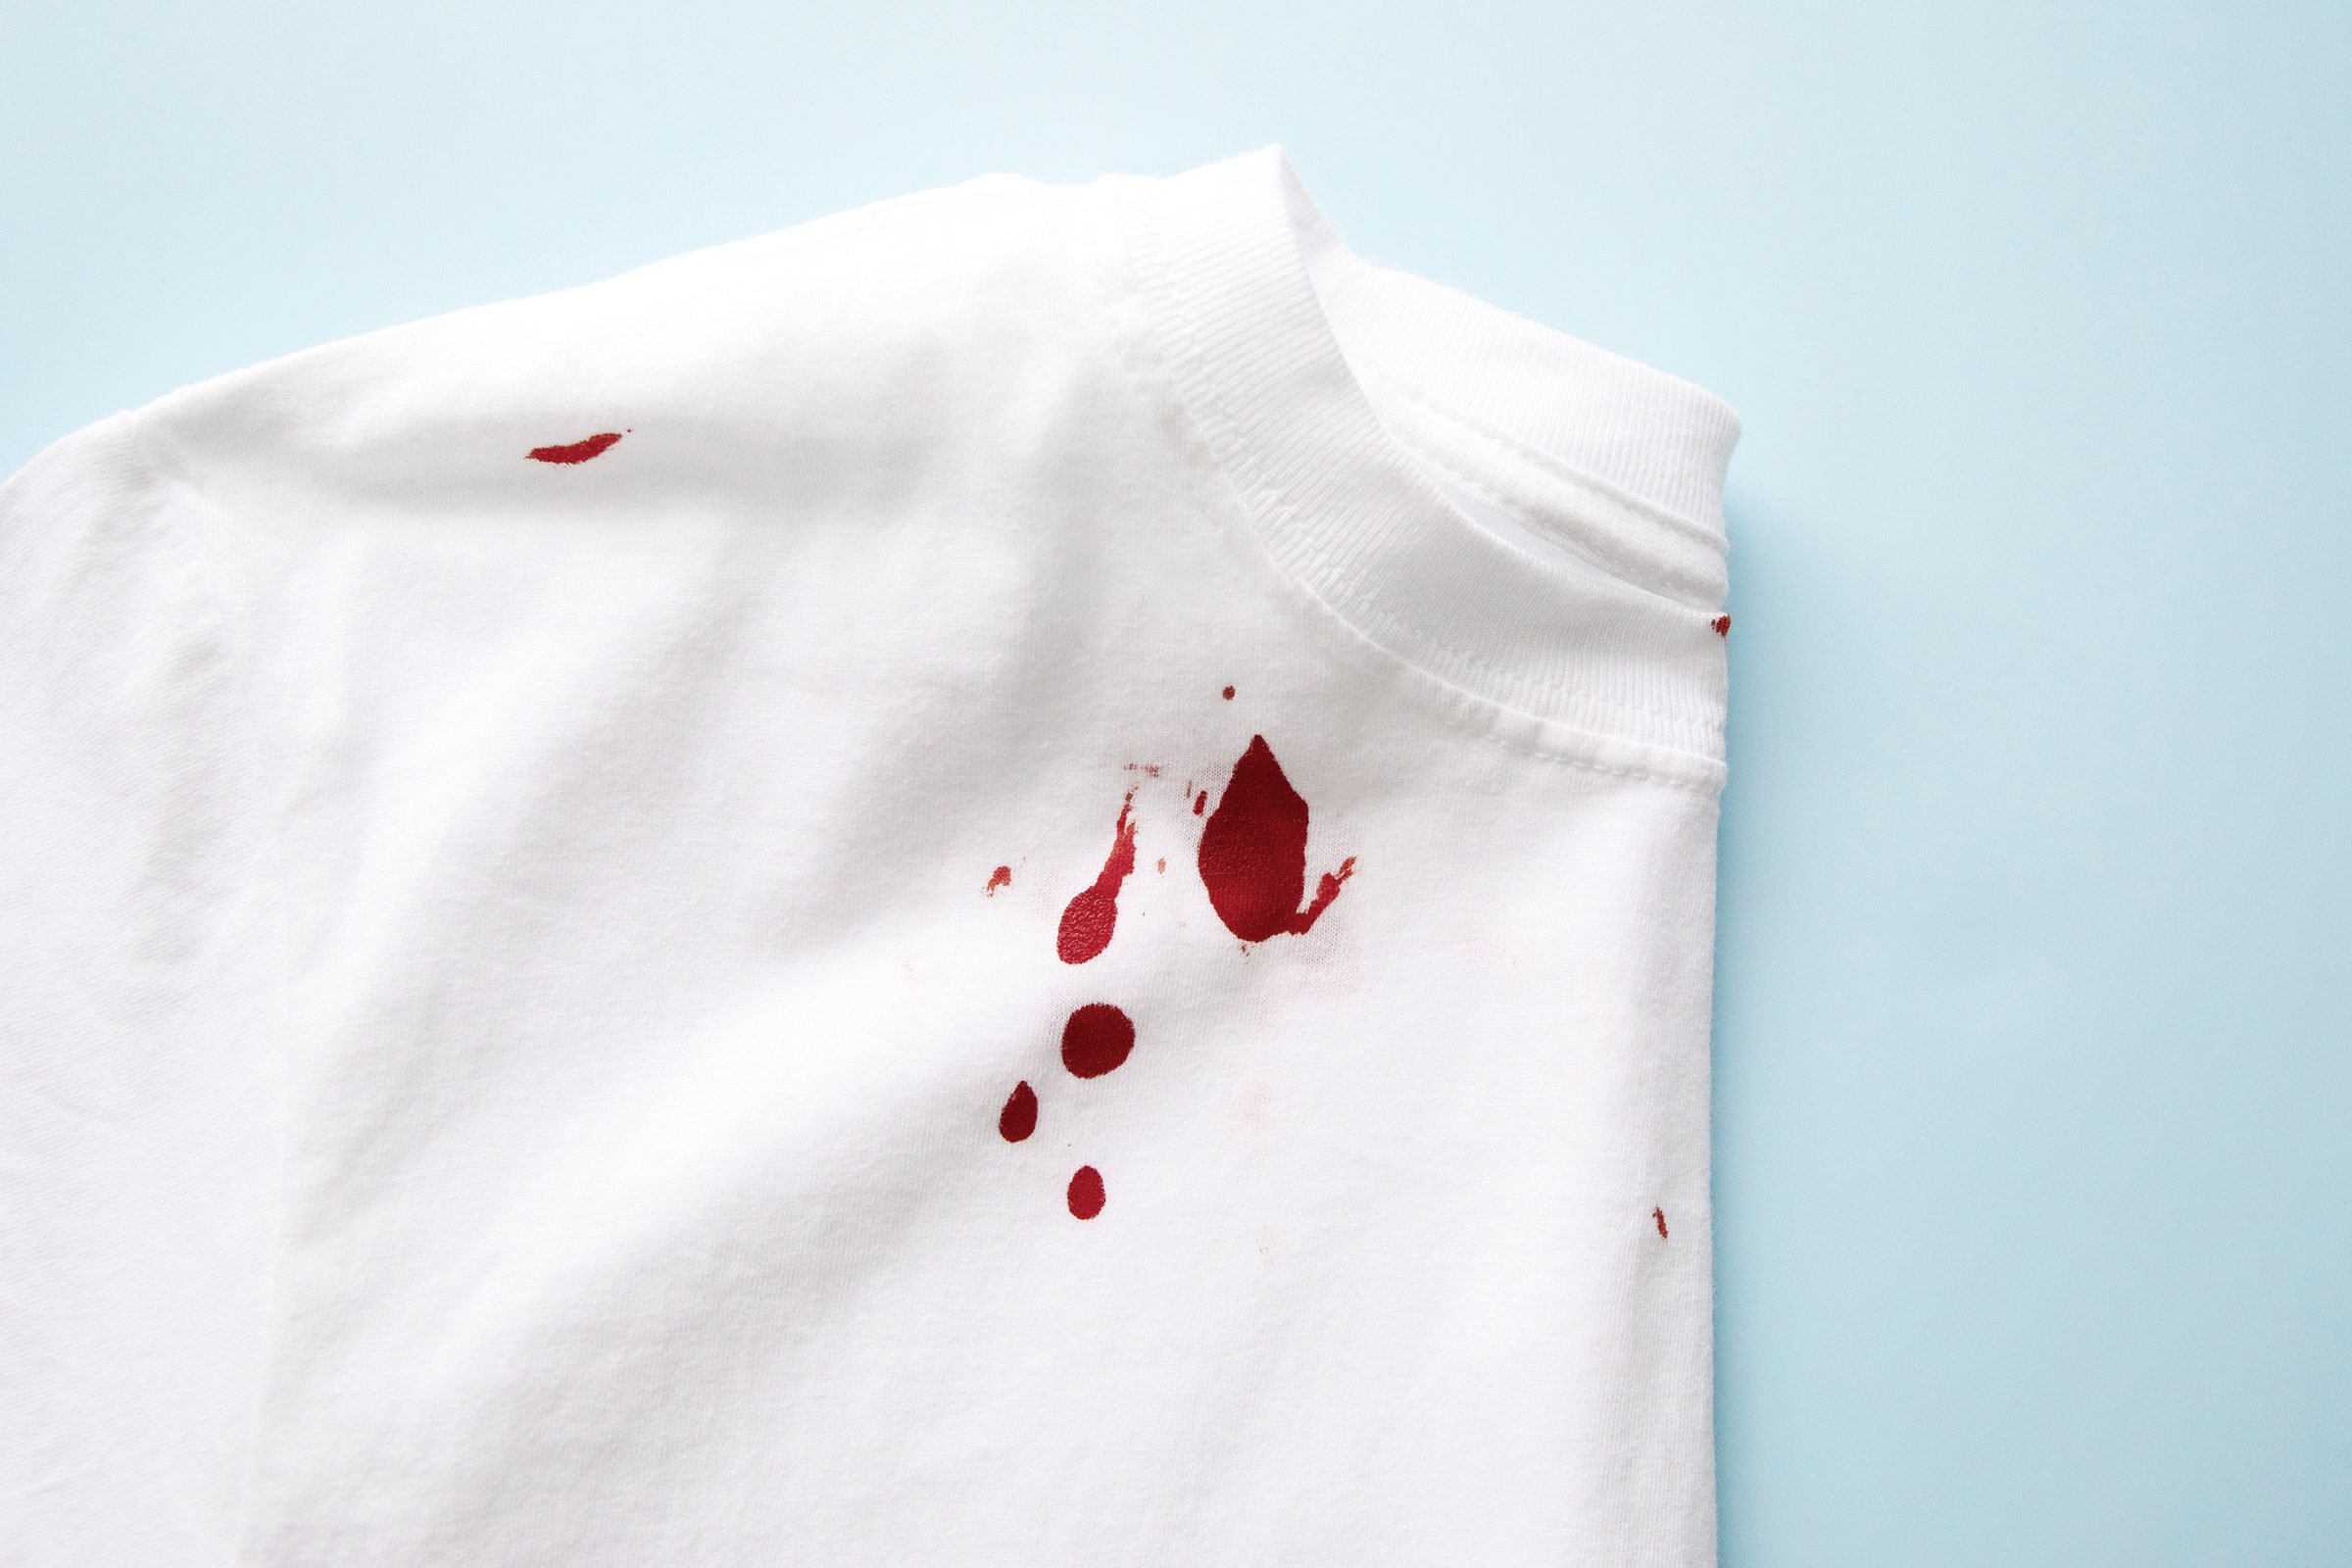 How to Remove Dried Period Stains - How to Get Blood Out of Your Clothes